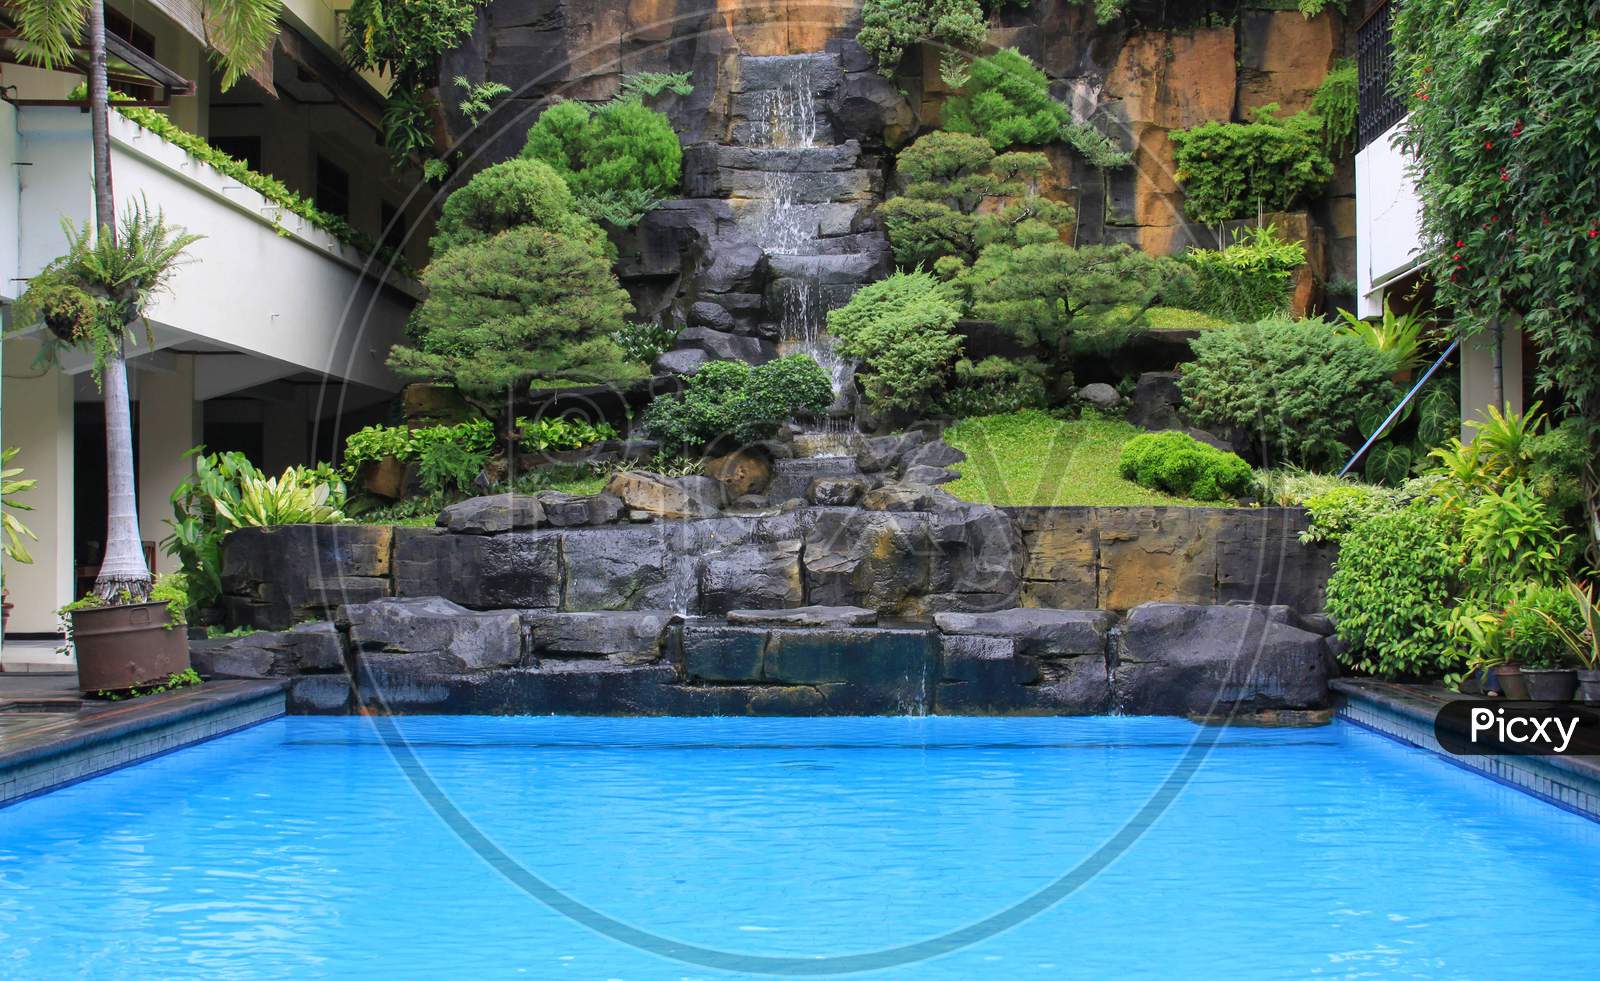 Waterfall And Plants Next To Swimming Pool Design